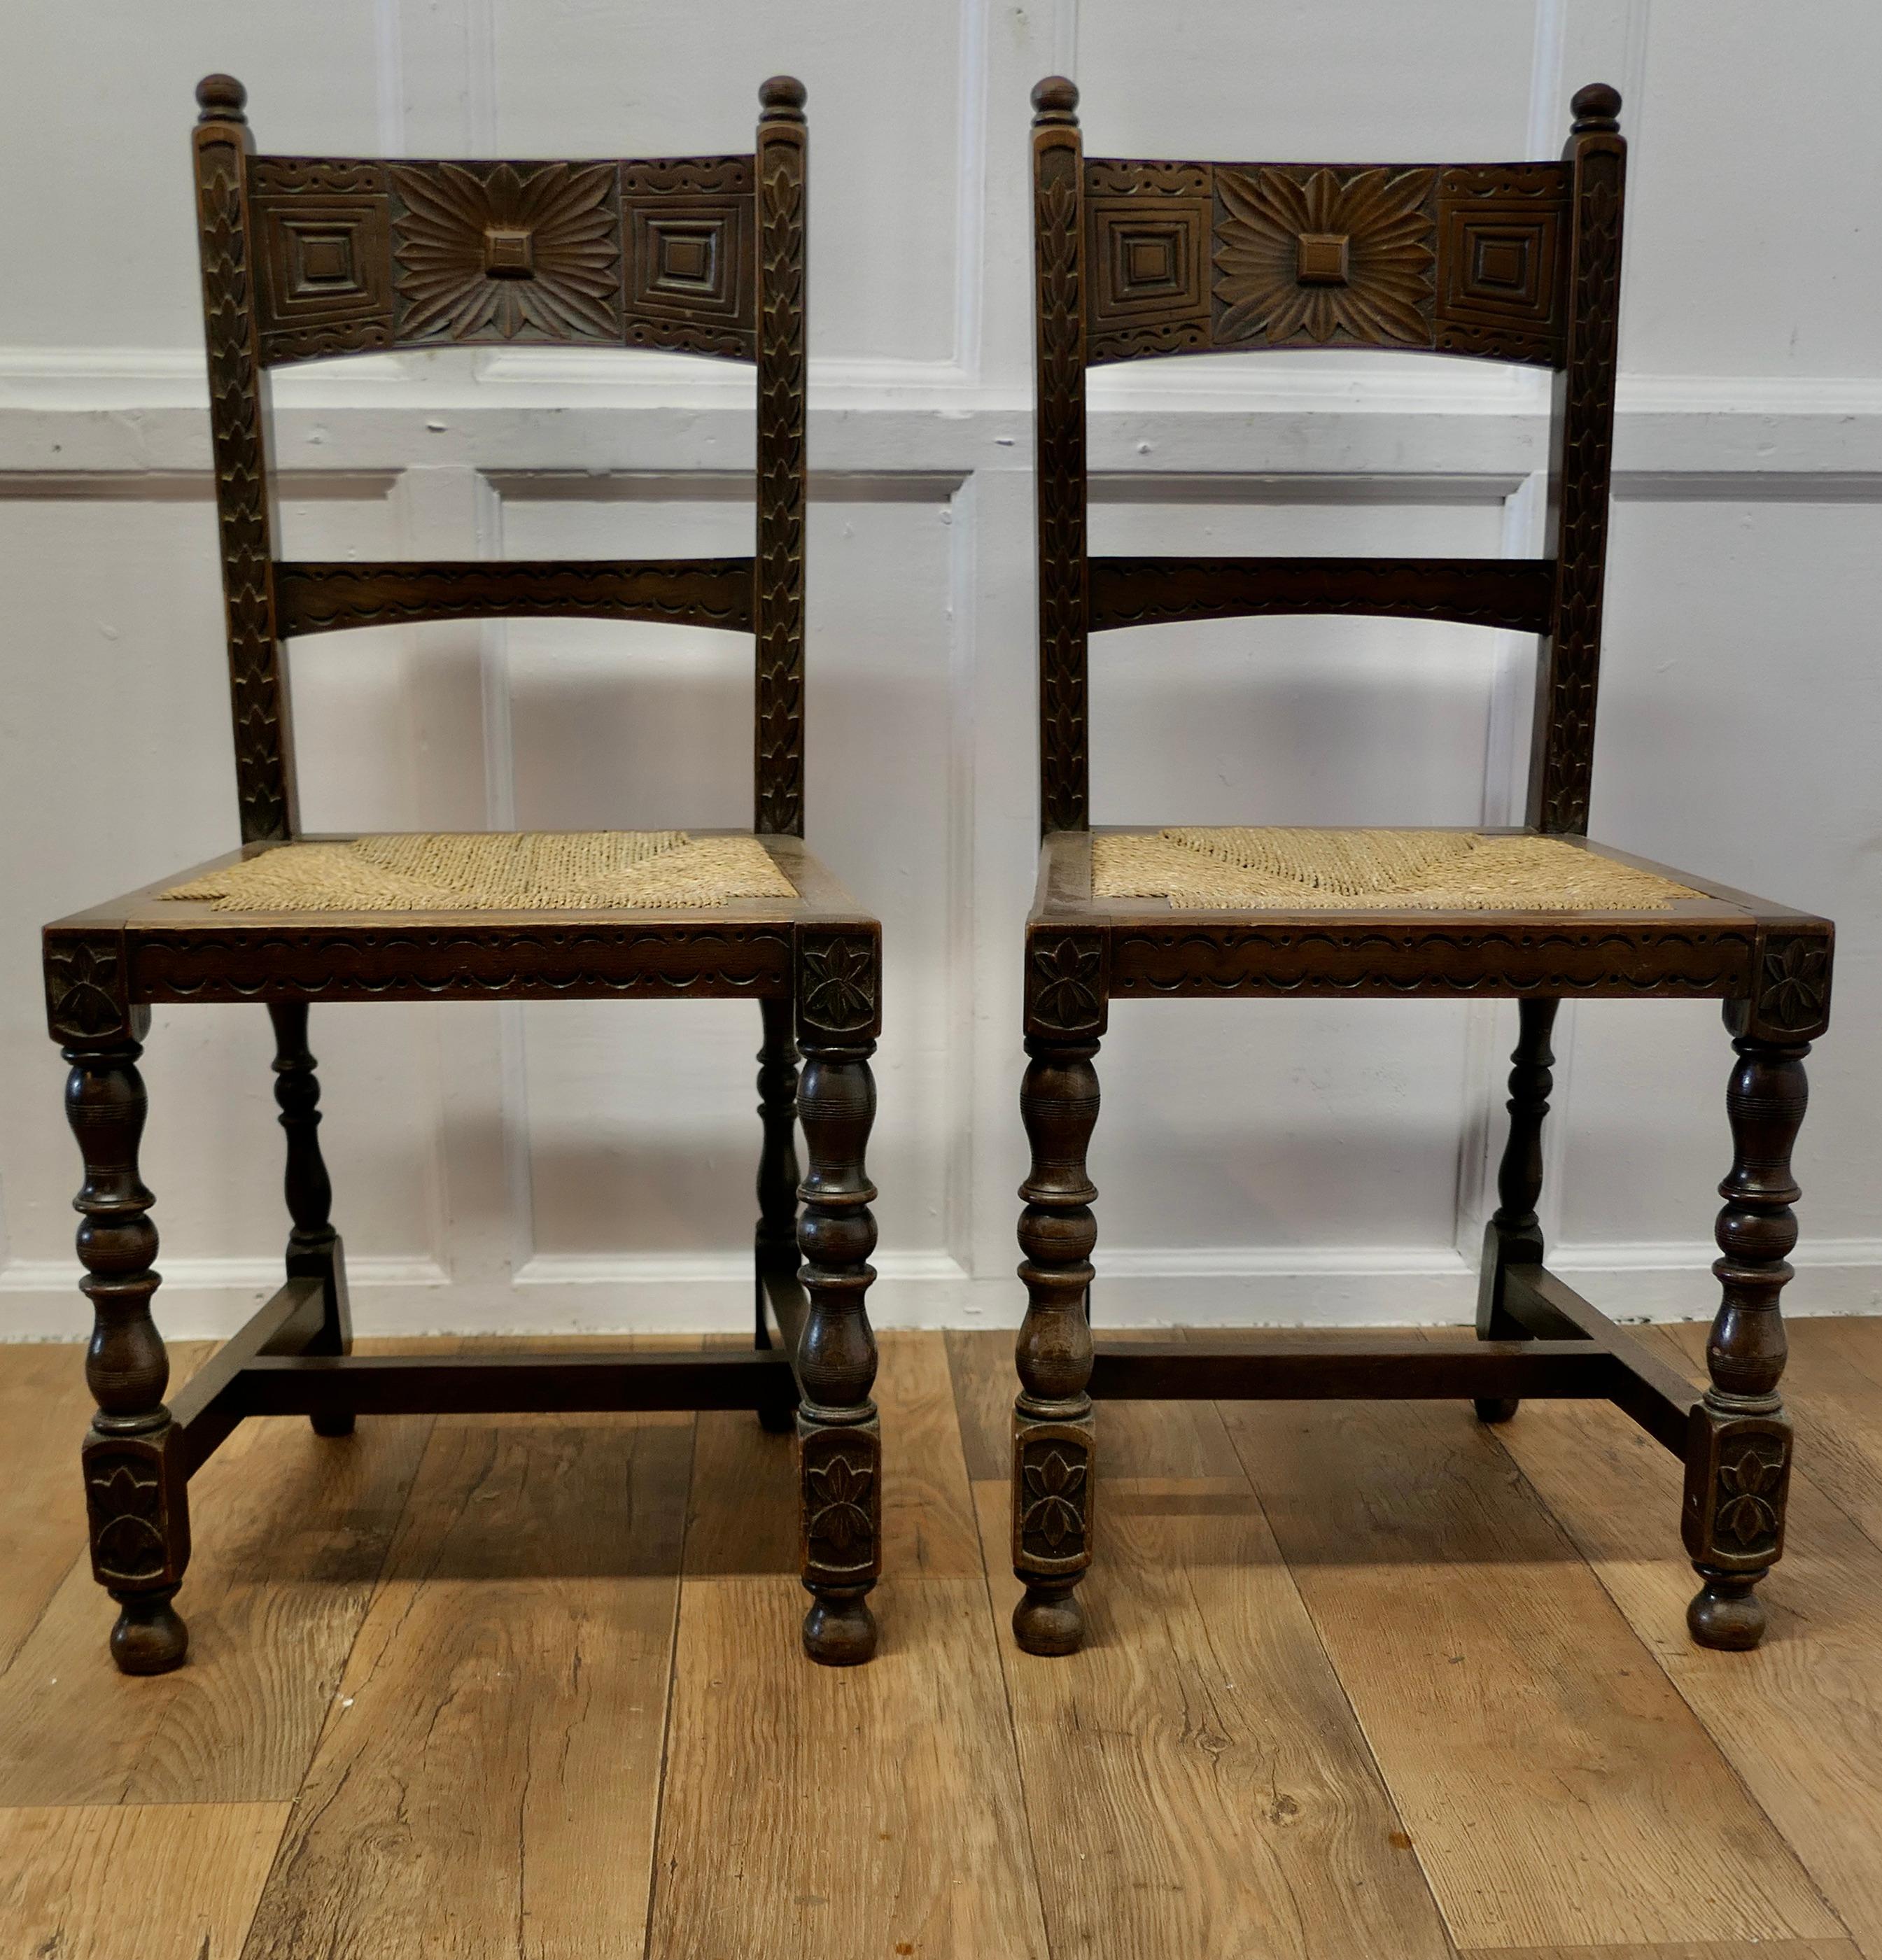 A Pair of Arts and Crafts Gothic Carved Oak Hall Chairs

This is a good quality and attractively carved pair of Chairs, the Chairs have heavily turned legs and the backs are carved in the Gothic style 
The chairs are in good condition and have woven